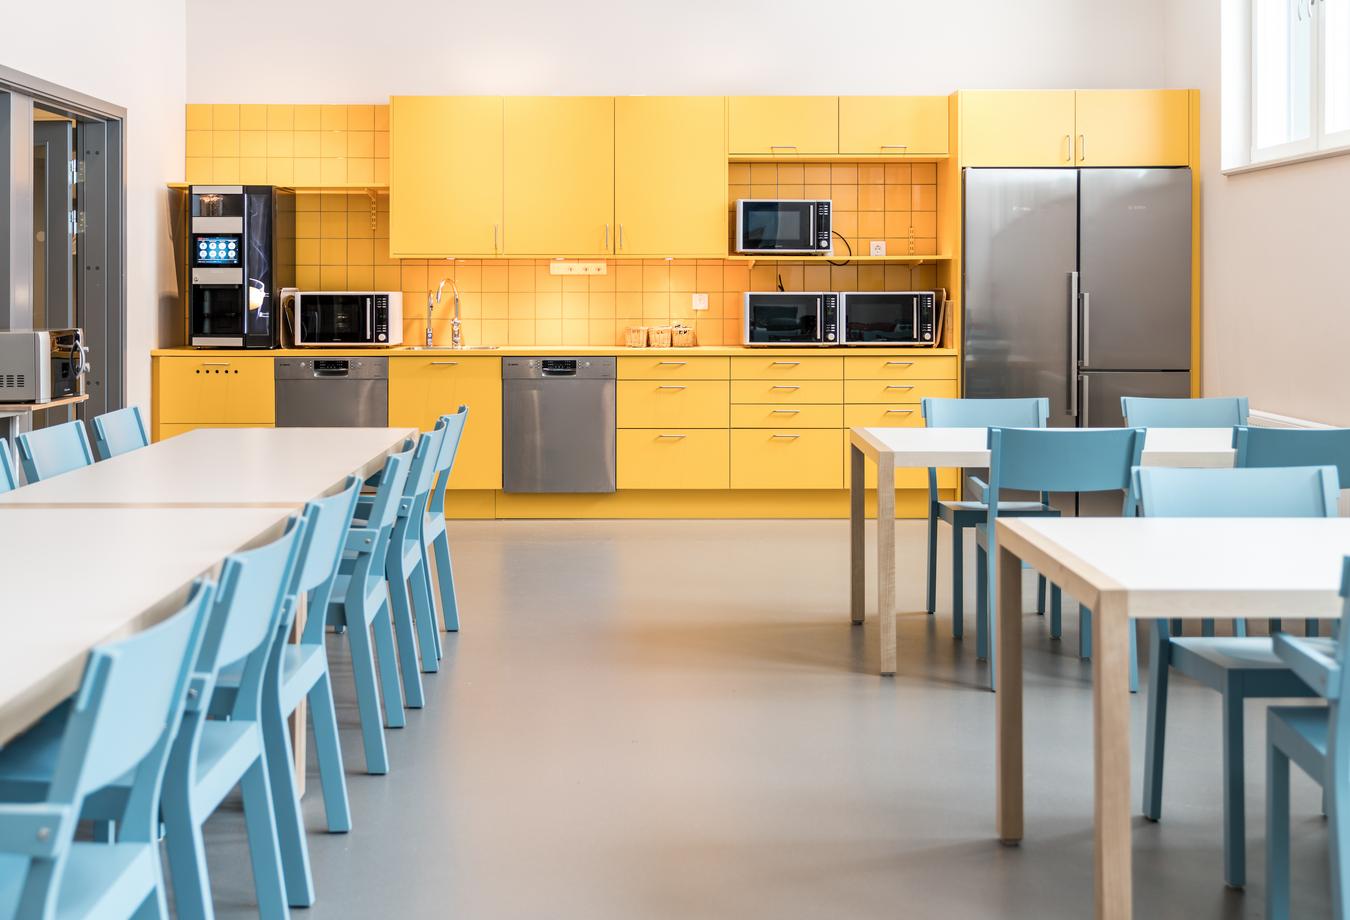 Canteen with yellow kitchen and light blue chairs. Photo